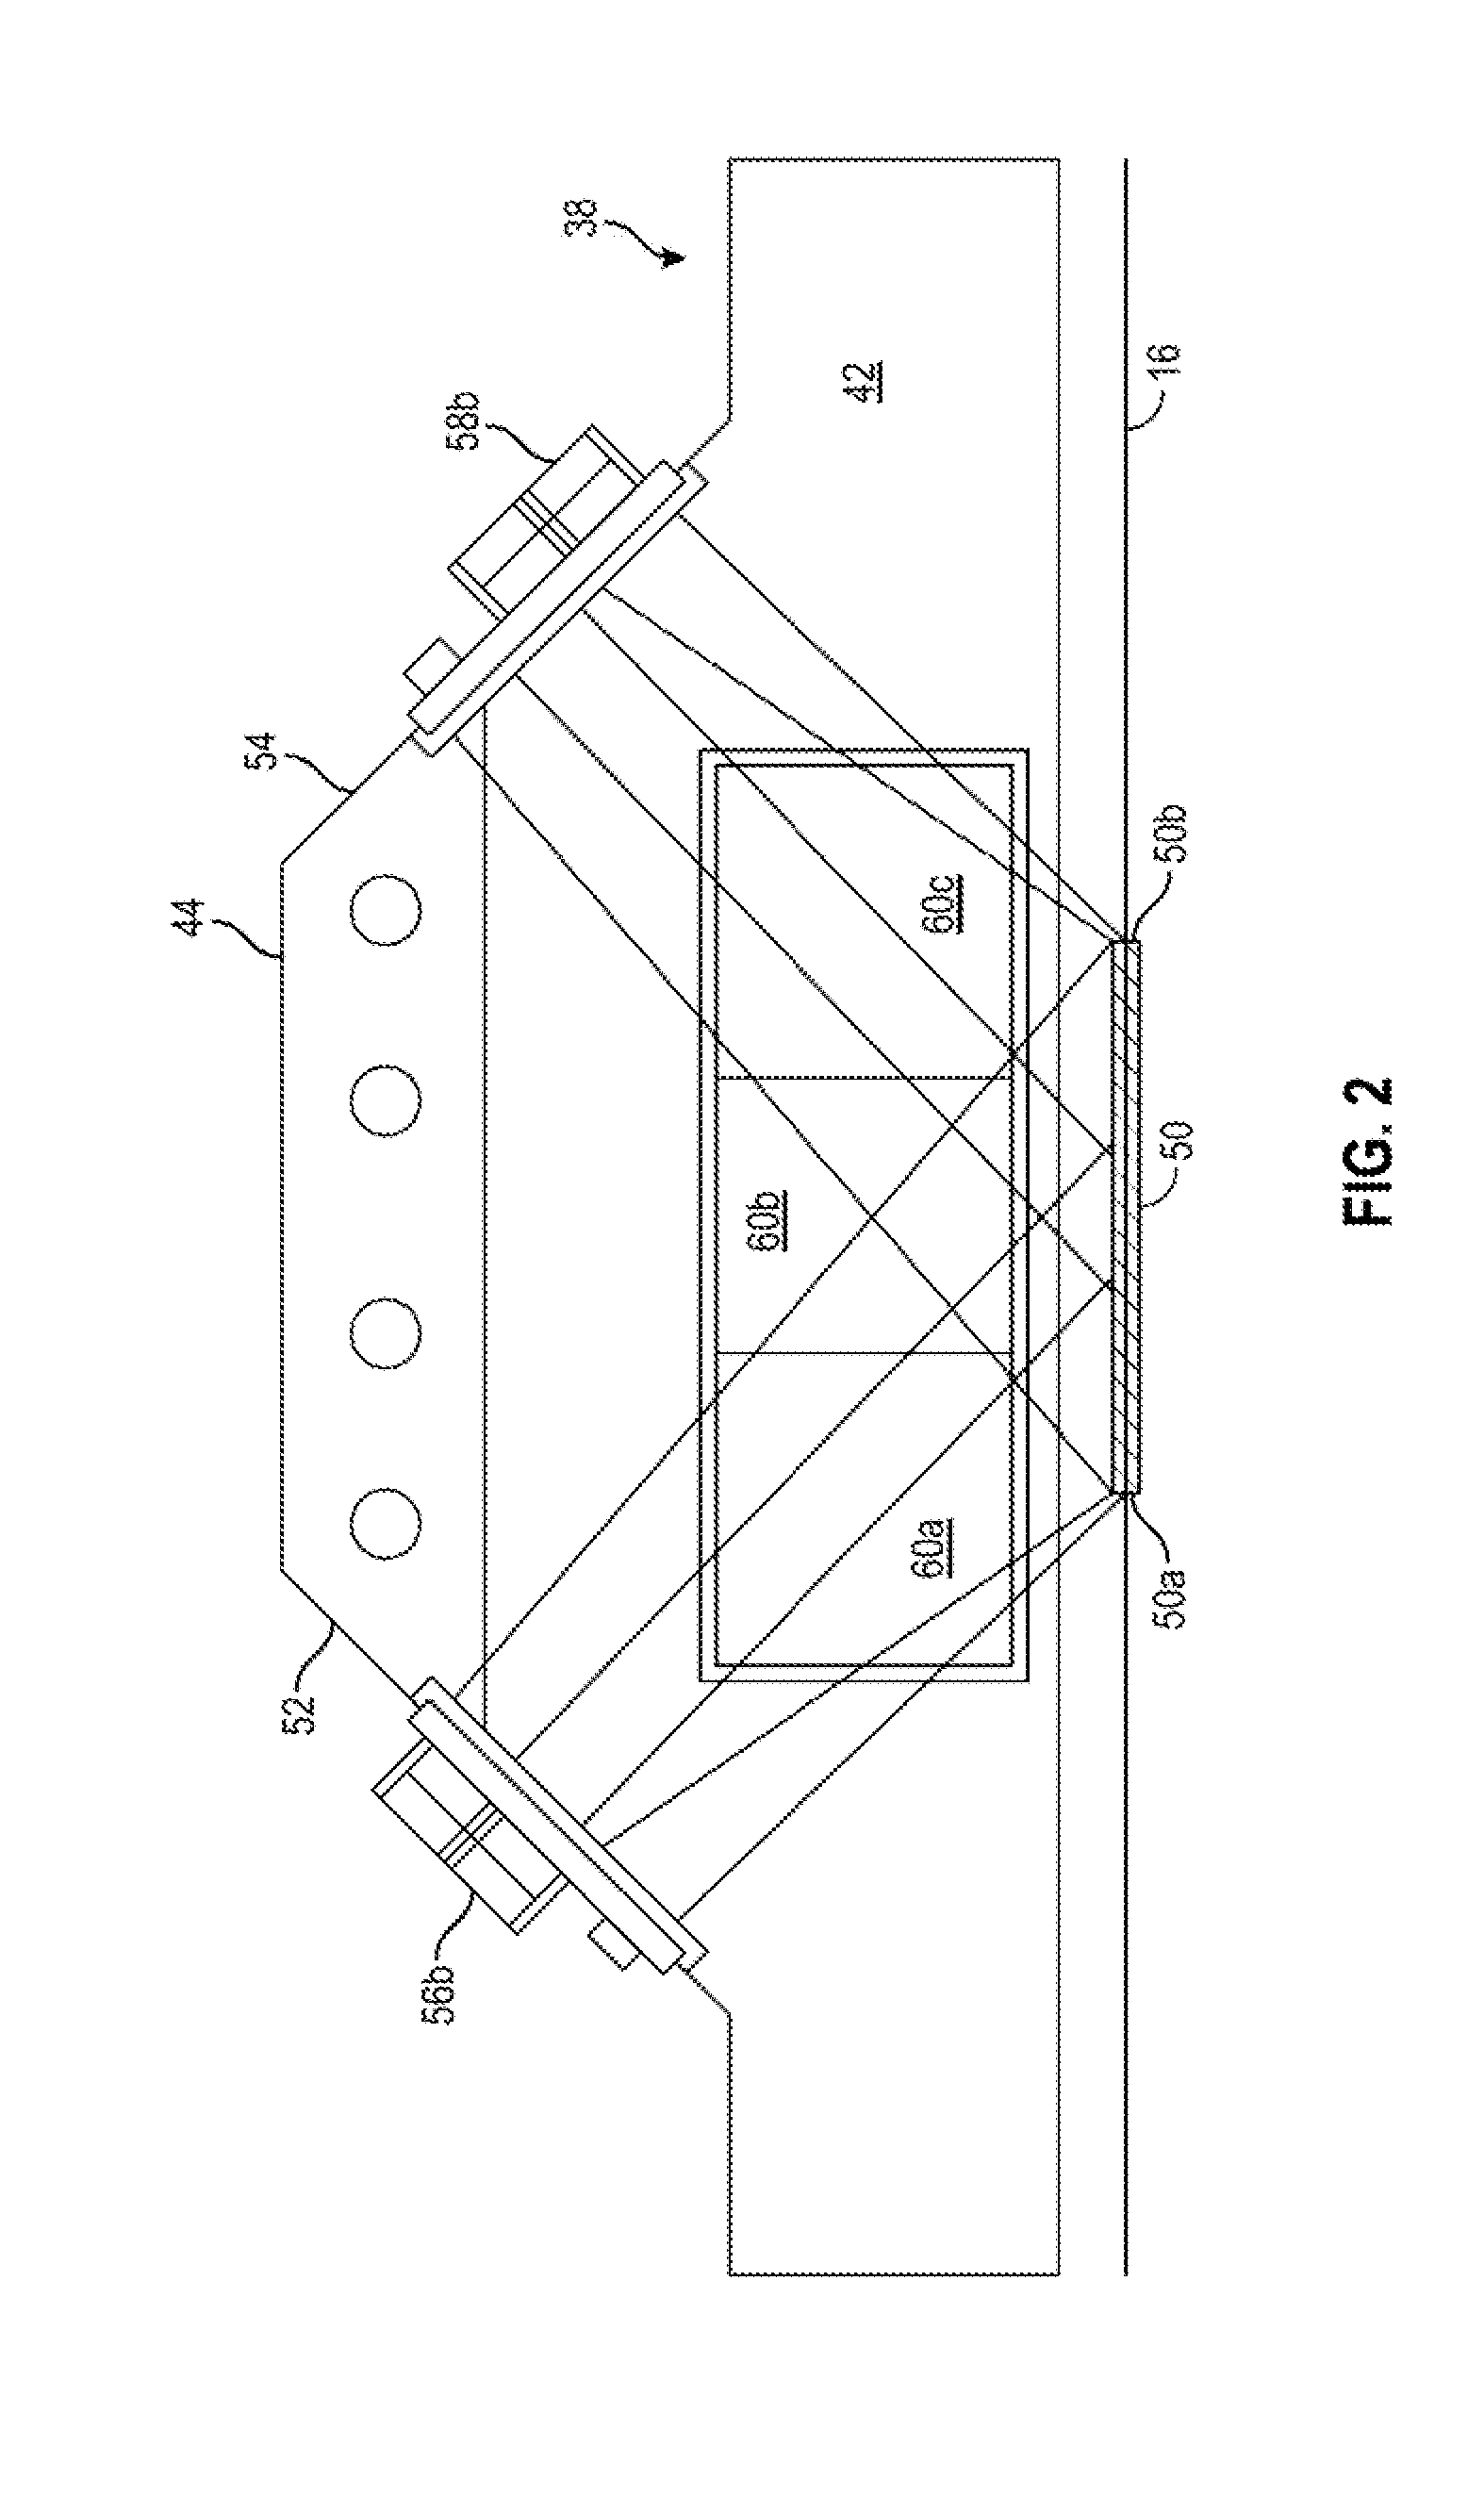 Apparatus and System for Three Dimensional Infrared Gradient Heating for Curing Powder Coatings on Porous Wood Products